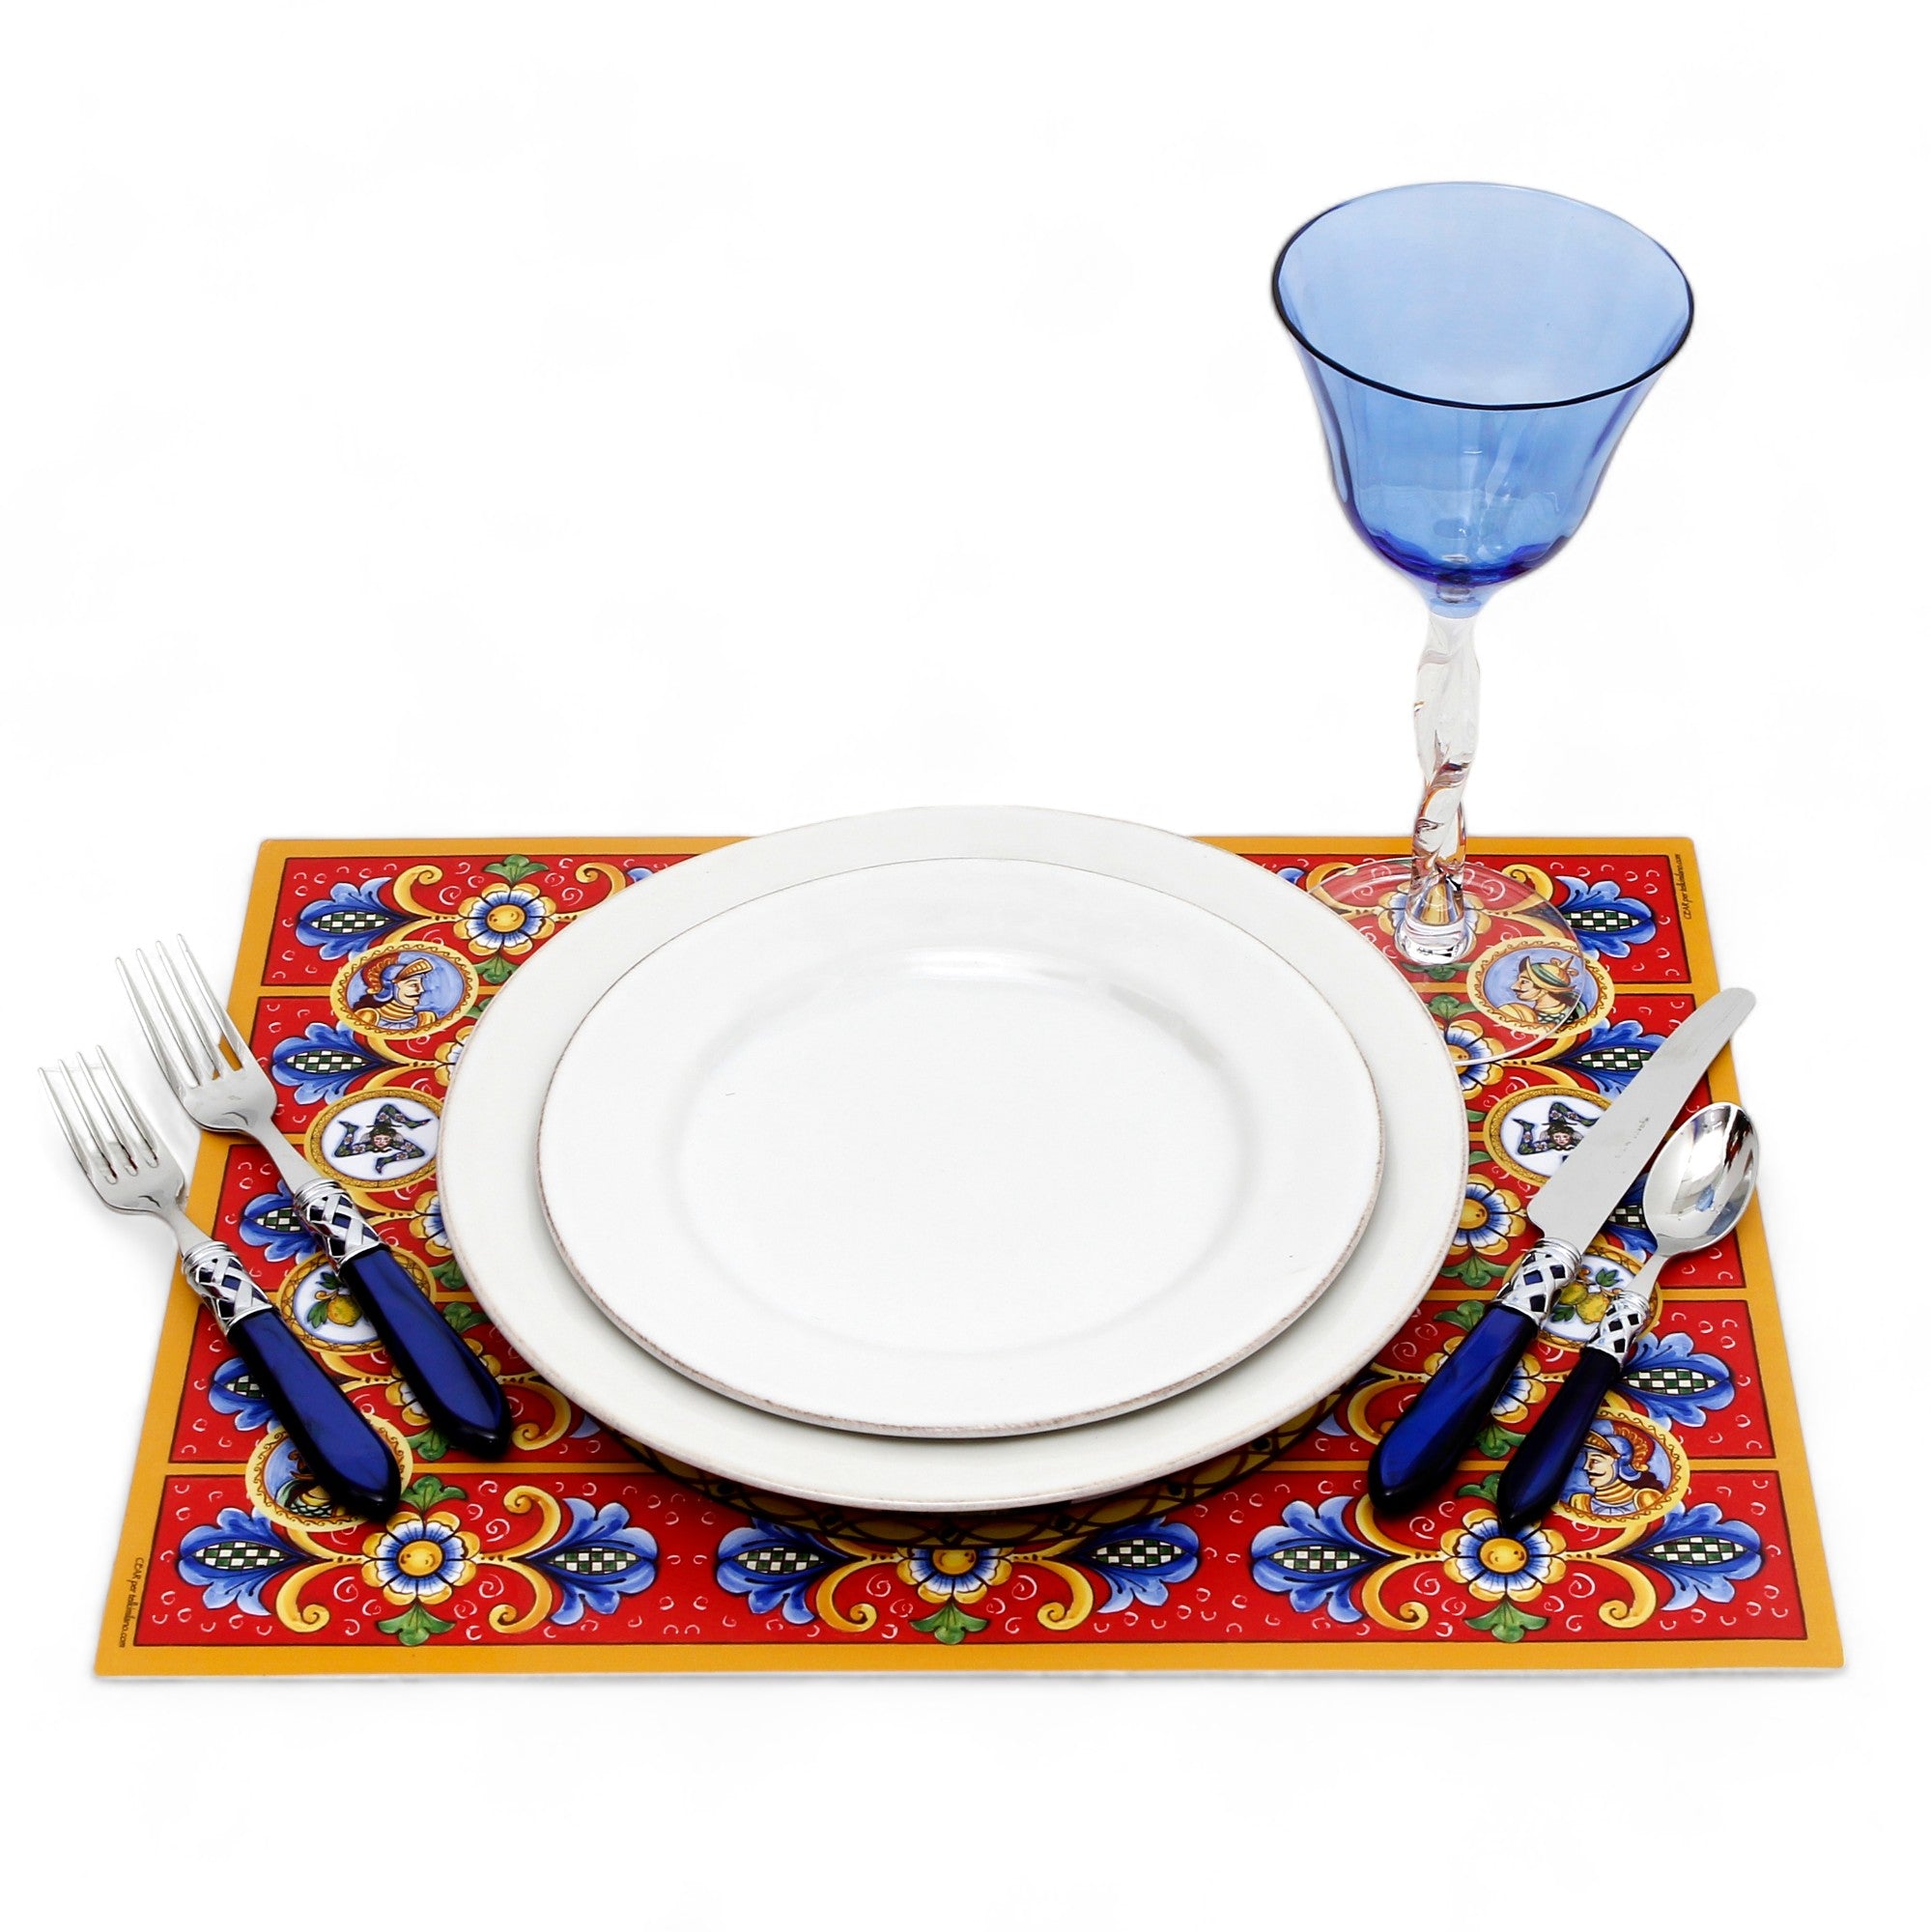 ITALIAN DREAM: Large Placemat - Stain Proof and Water Repellent PVC - Design ACIREALE/A